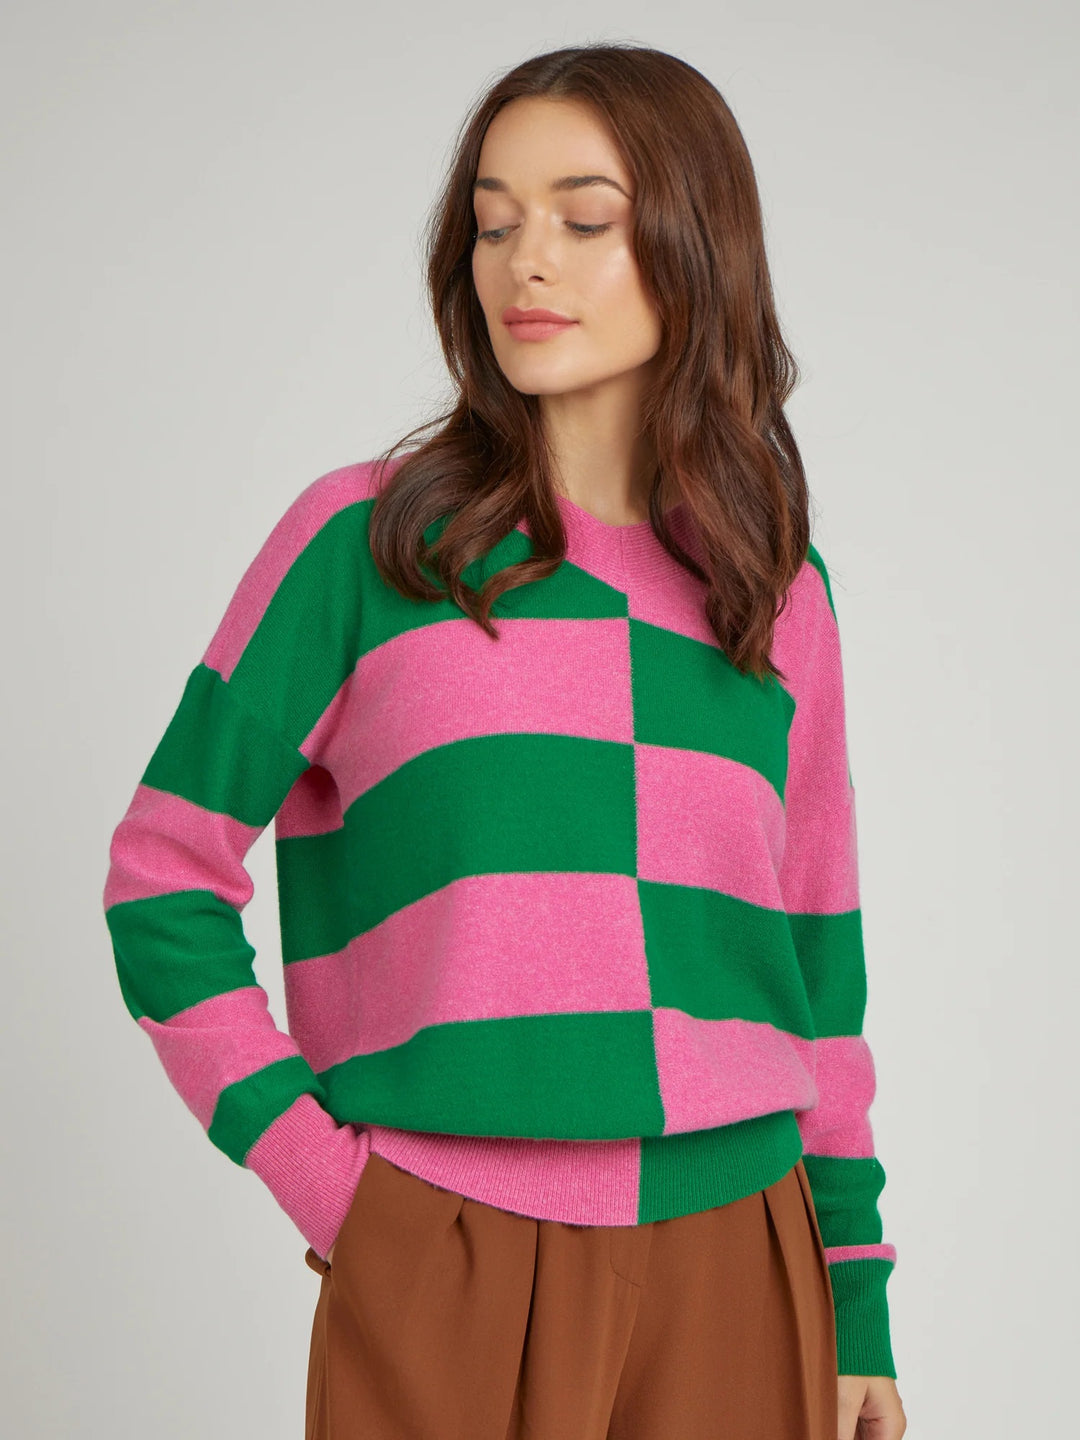 Cocoa Cashmere - This stylish Cashmere Murphy V Neck Sweater is designed to make a statement. Crafted from 100% luxurious cashmere, it features a flattering v-neck, drop shoulders and a stunning battenburg-inspired design. 